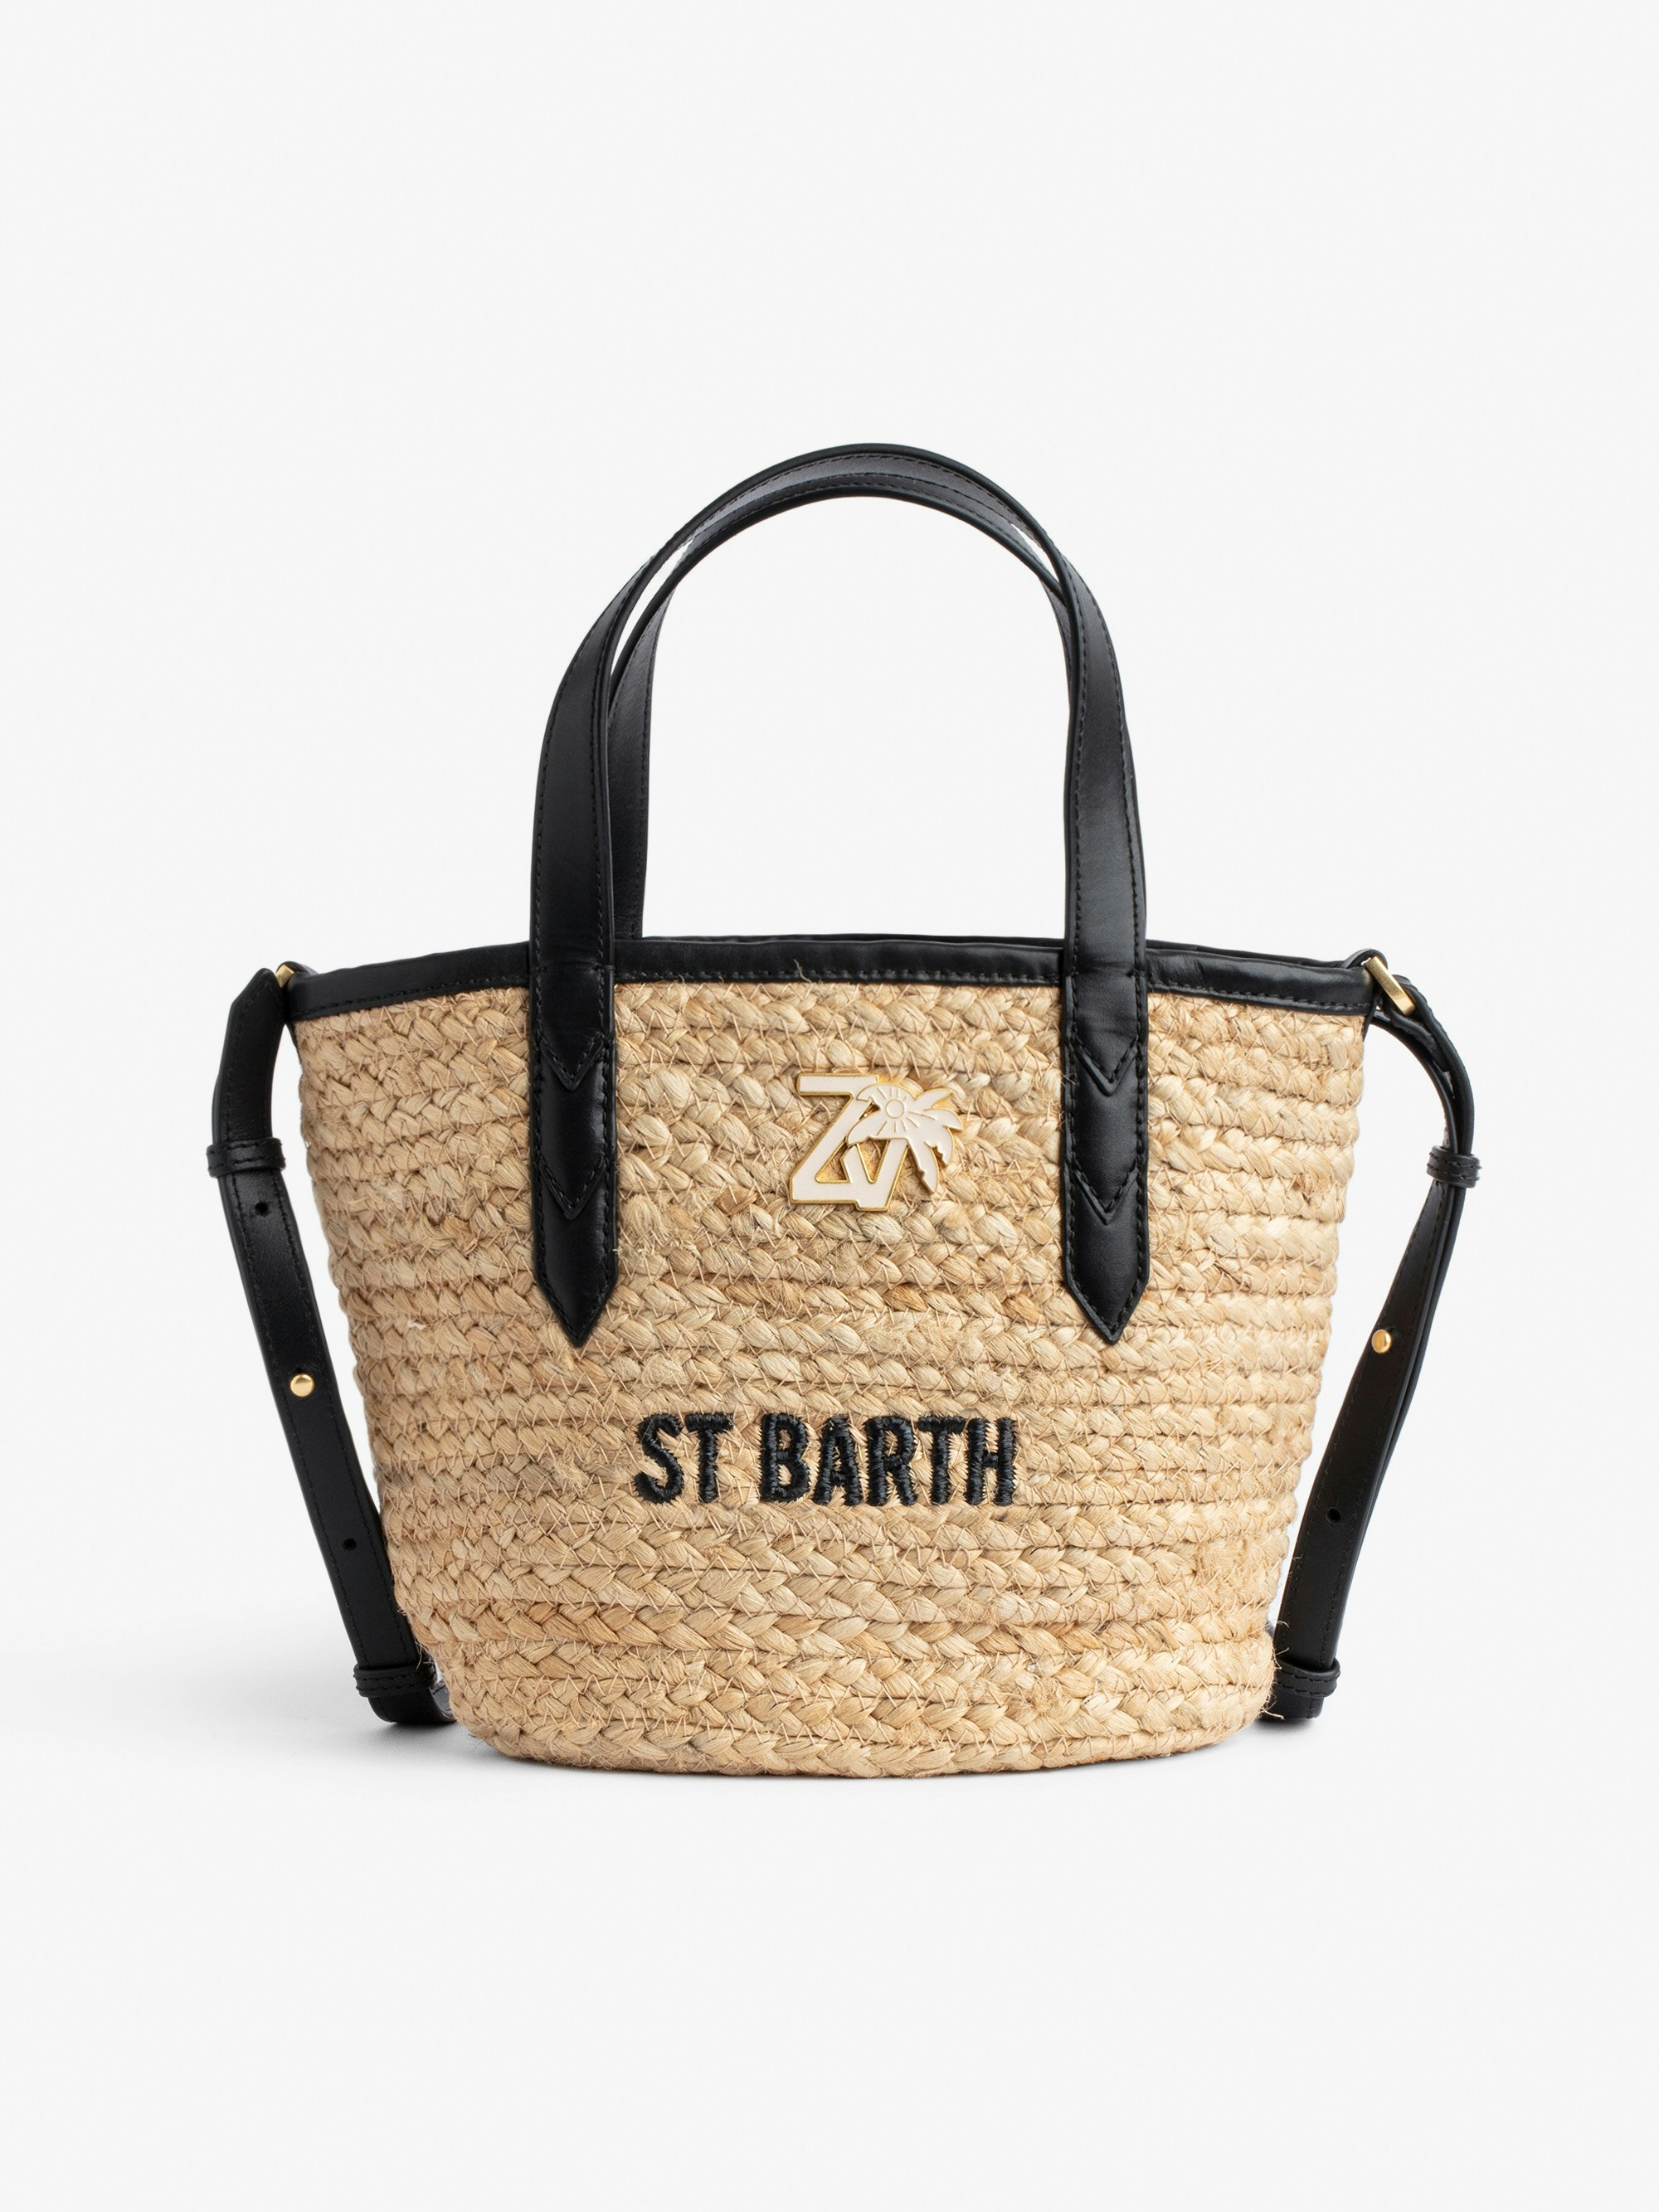 Le Baby Beach Bag - Women's straw bag with black leather shoulder strap, "St Barth" embroidery and ZV charm